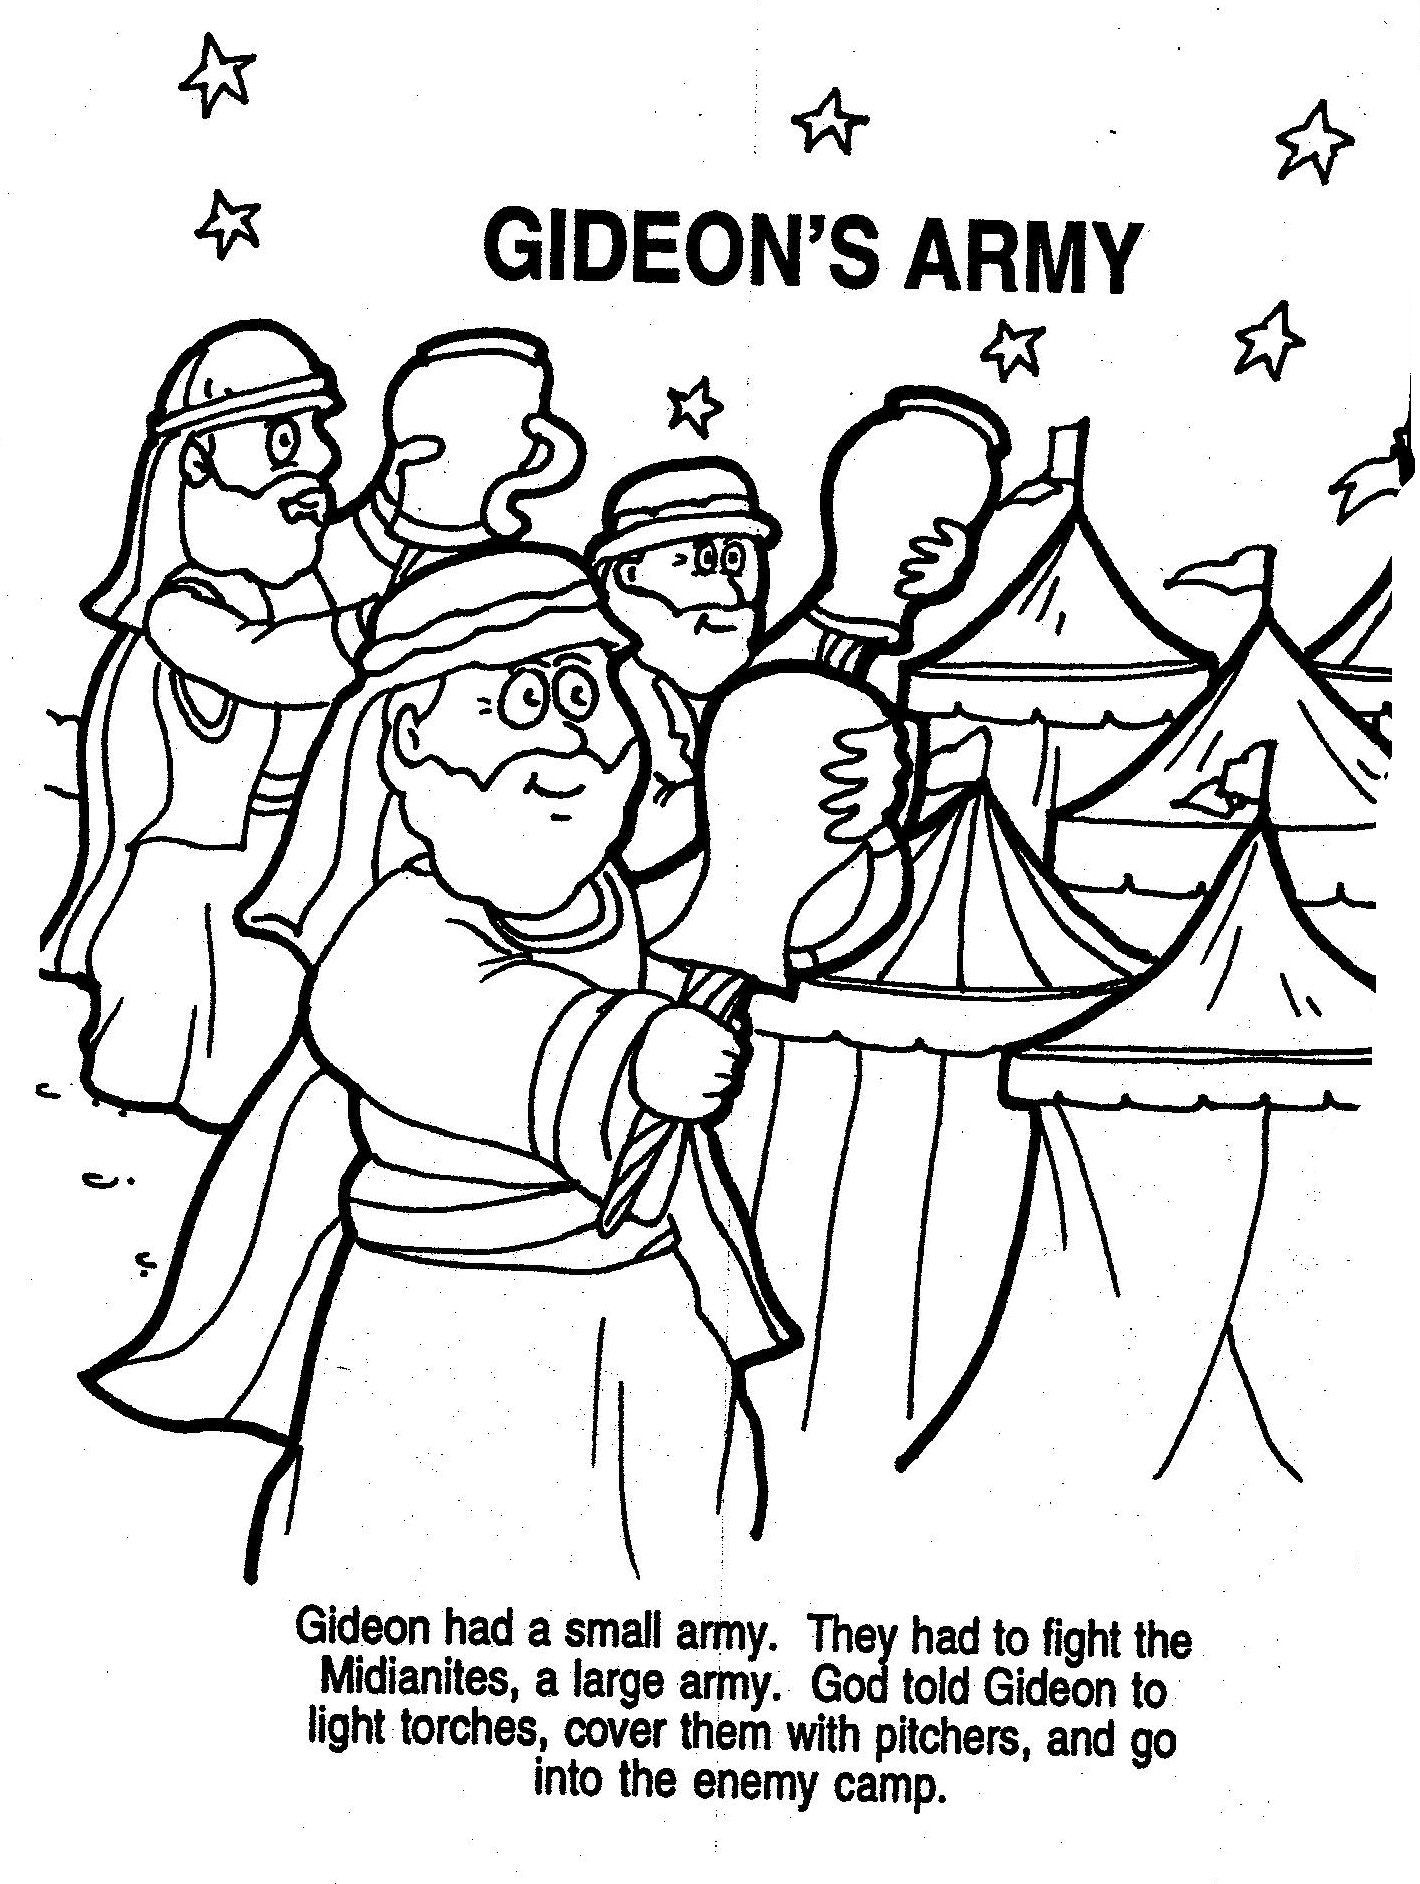 Children Bible Stories Coloring Pages
 Coloring Pages for children is a wonderful activity that